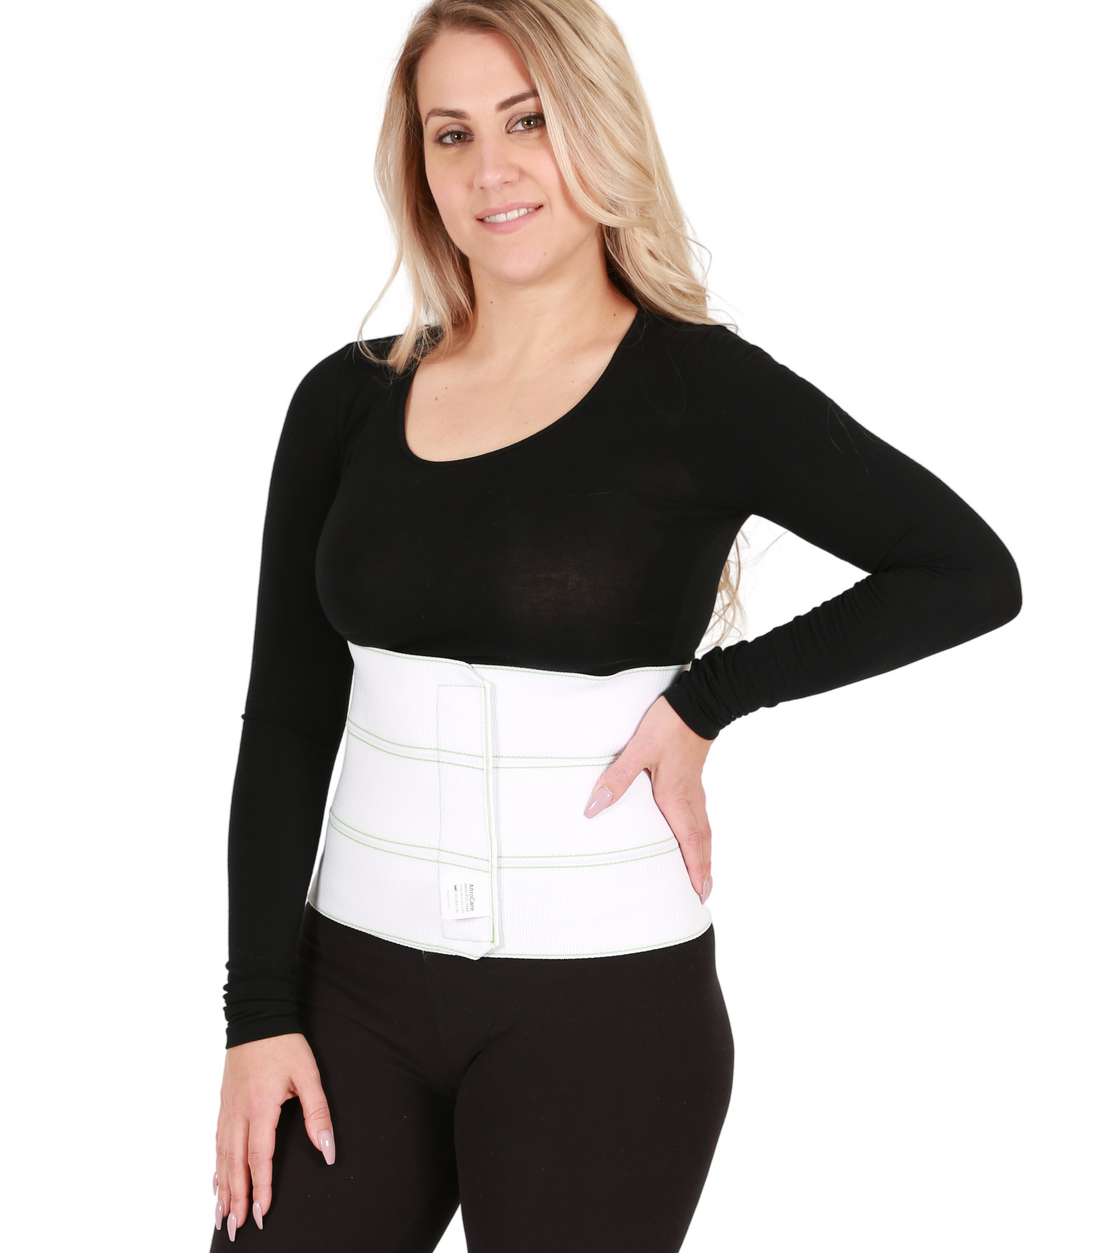  Abdominal Tummy Tuck Binder Post Op Belly Band Support Belt  After Hysterectomy Surgery Recovery Compression Wrap For Stomach To Protect  Incisions For Women Black